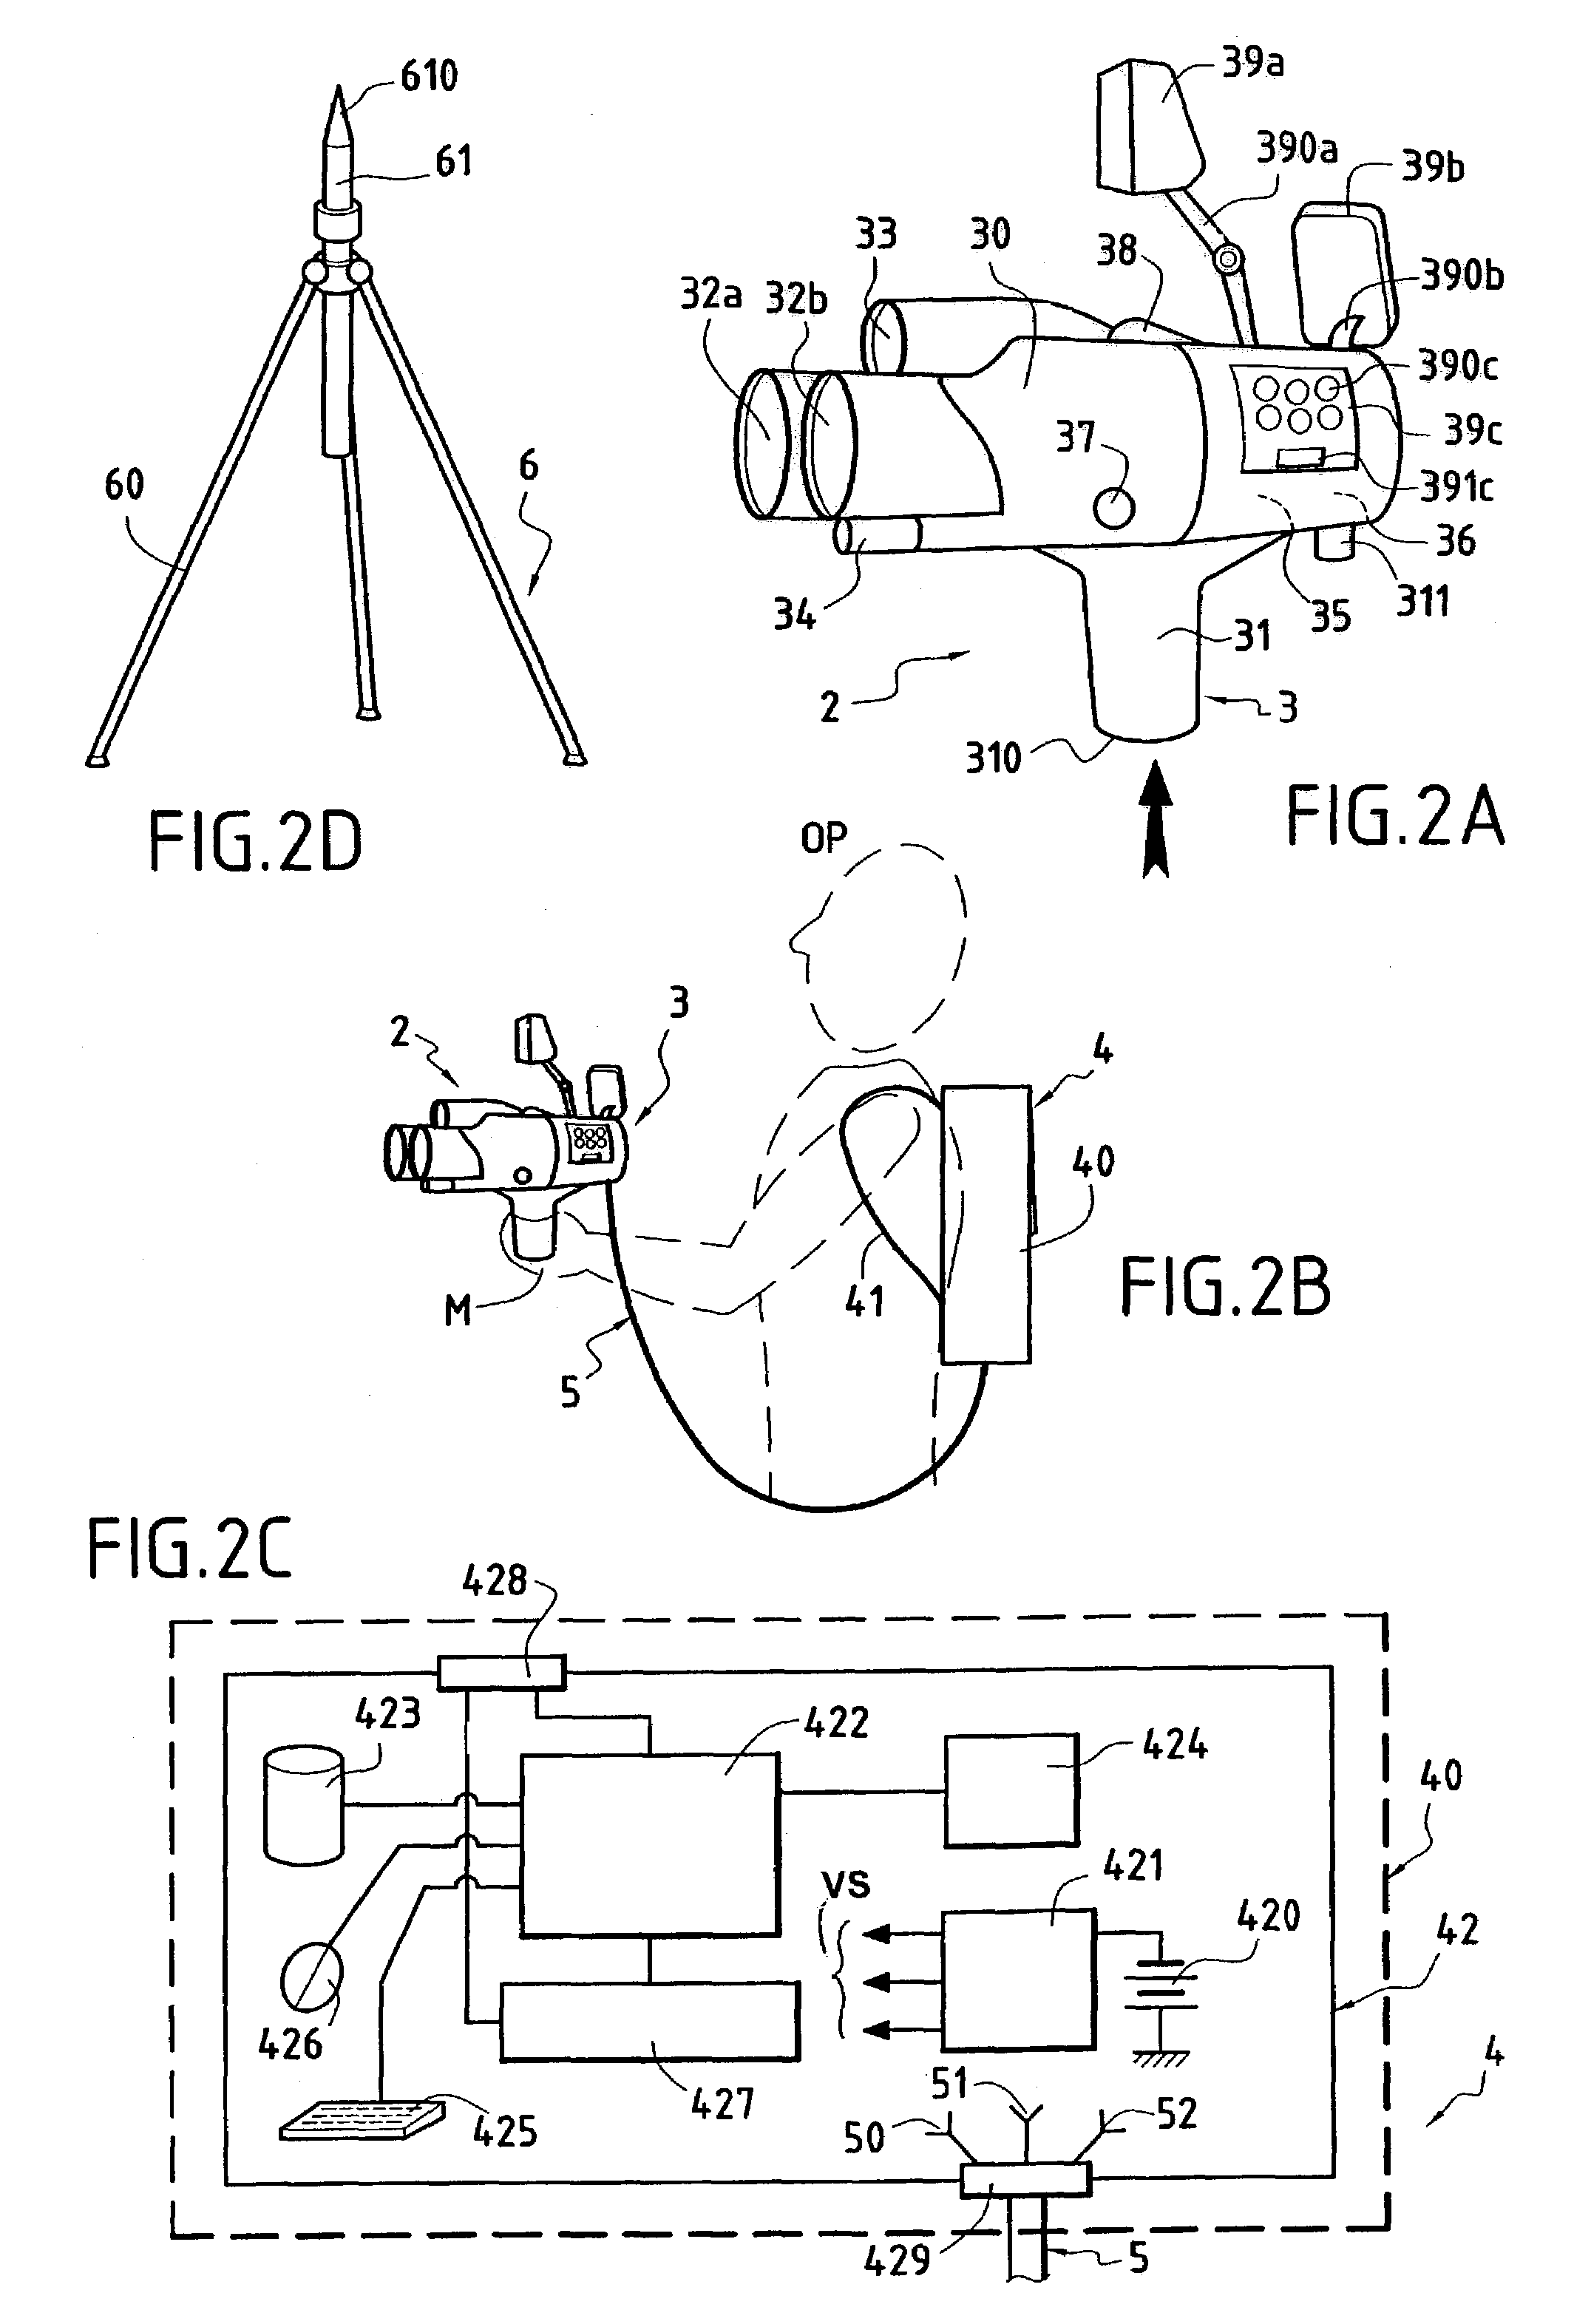 System and a method of three-dimensional modeling and restitution of an object